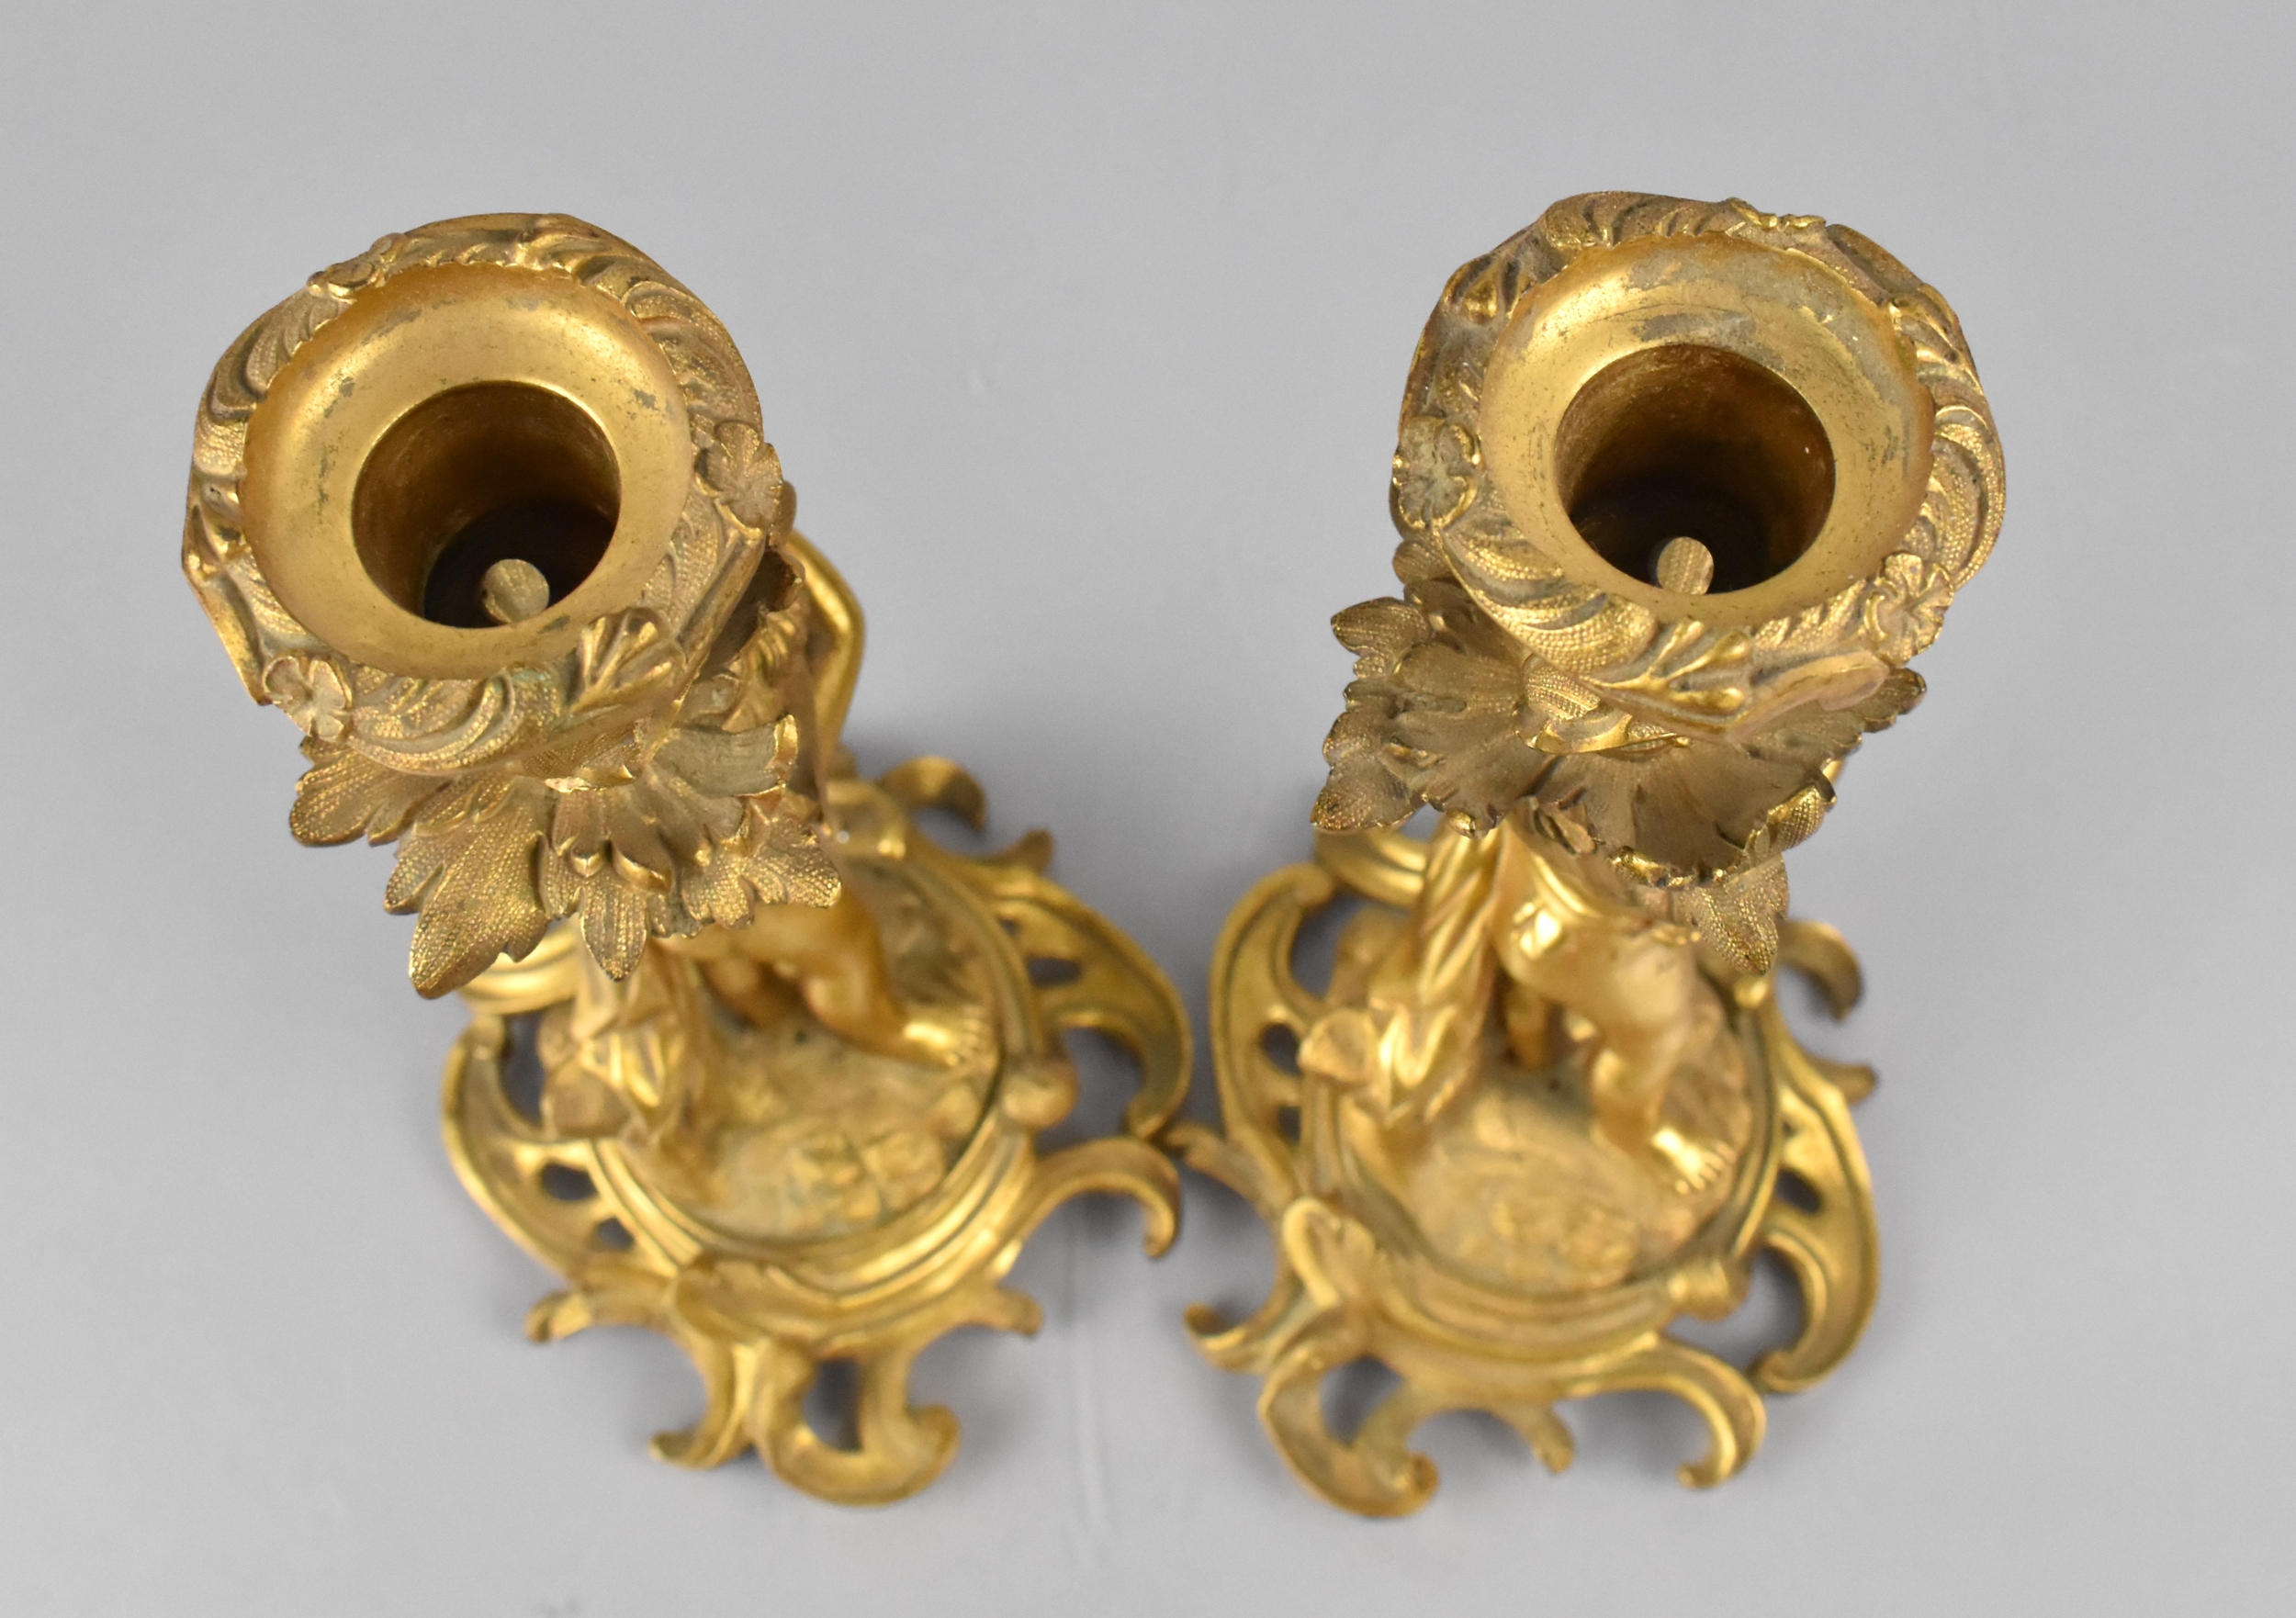 A Pair of 19th Century Gilt Bronze Candlesticks Modelled with Classical Cherubs Supporting - Image 4 of 4